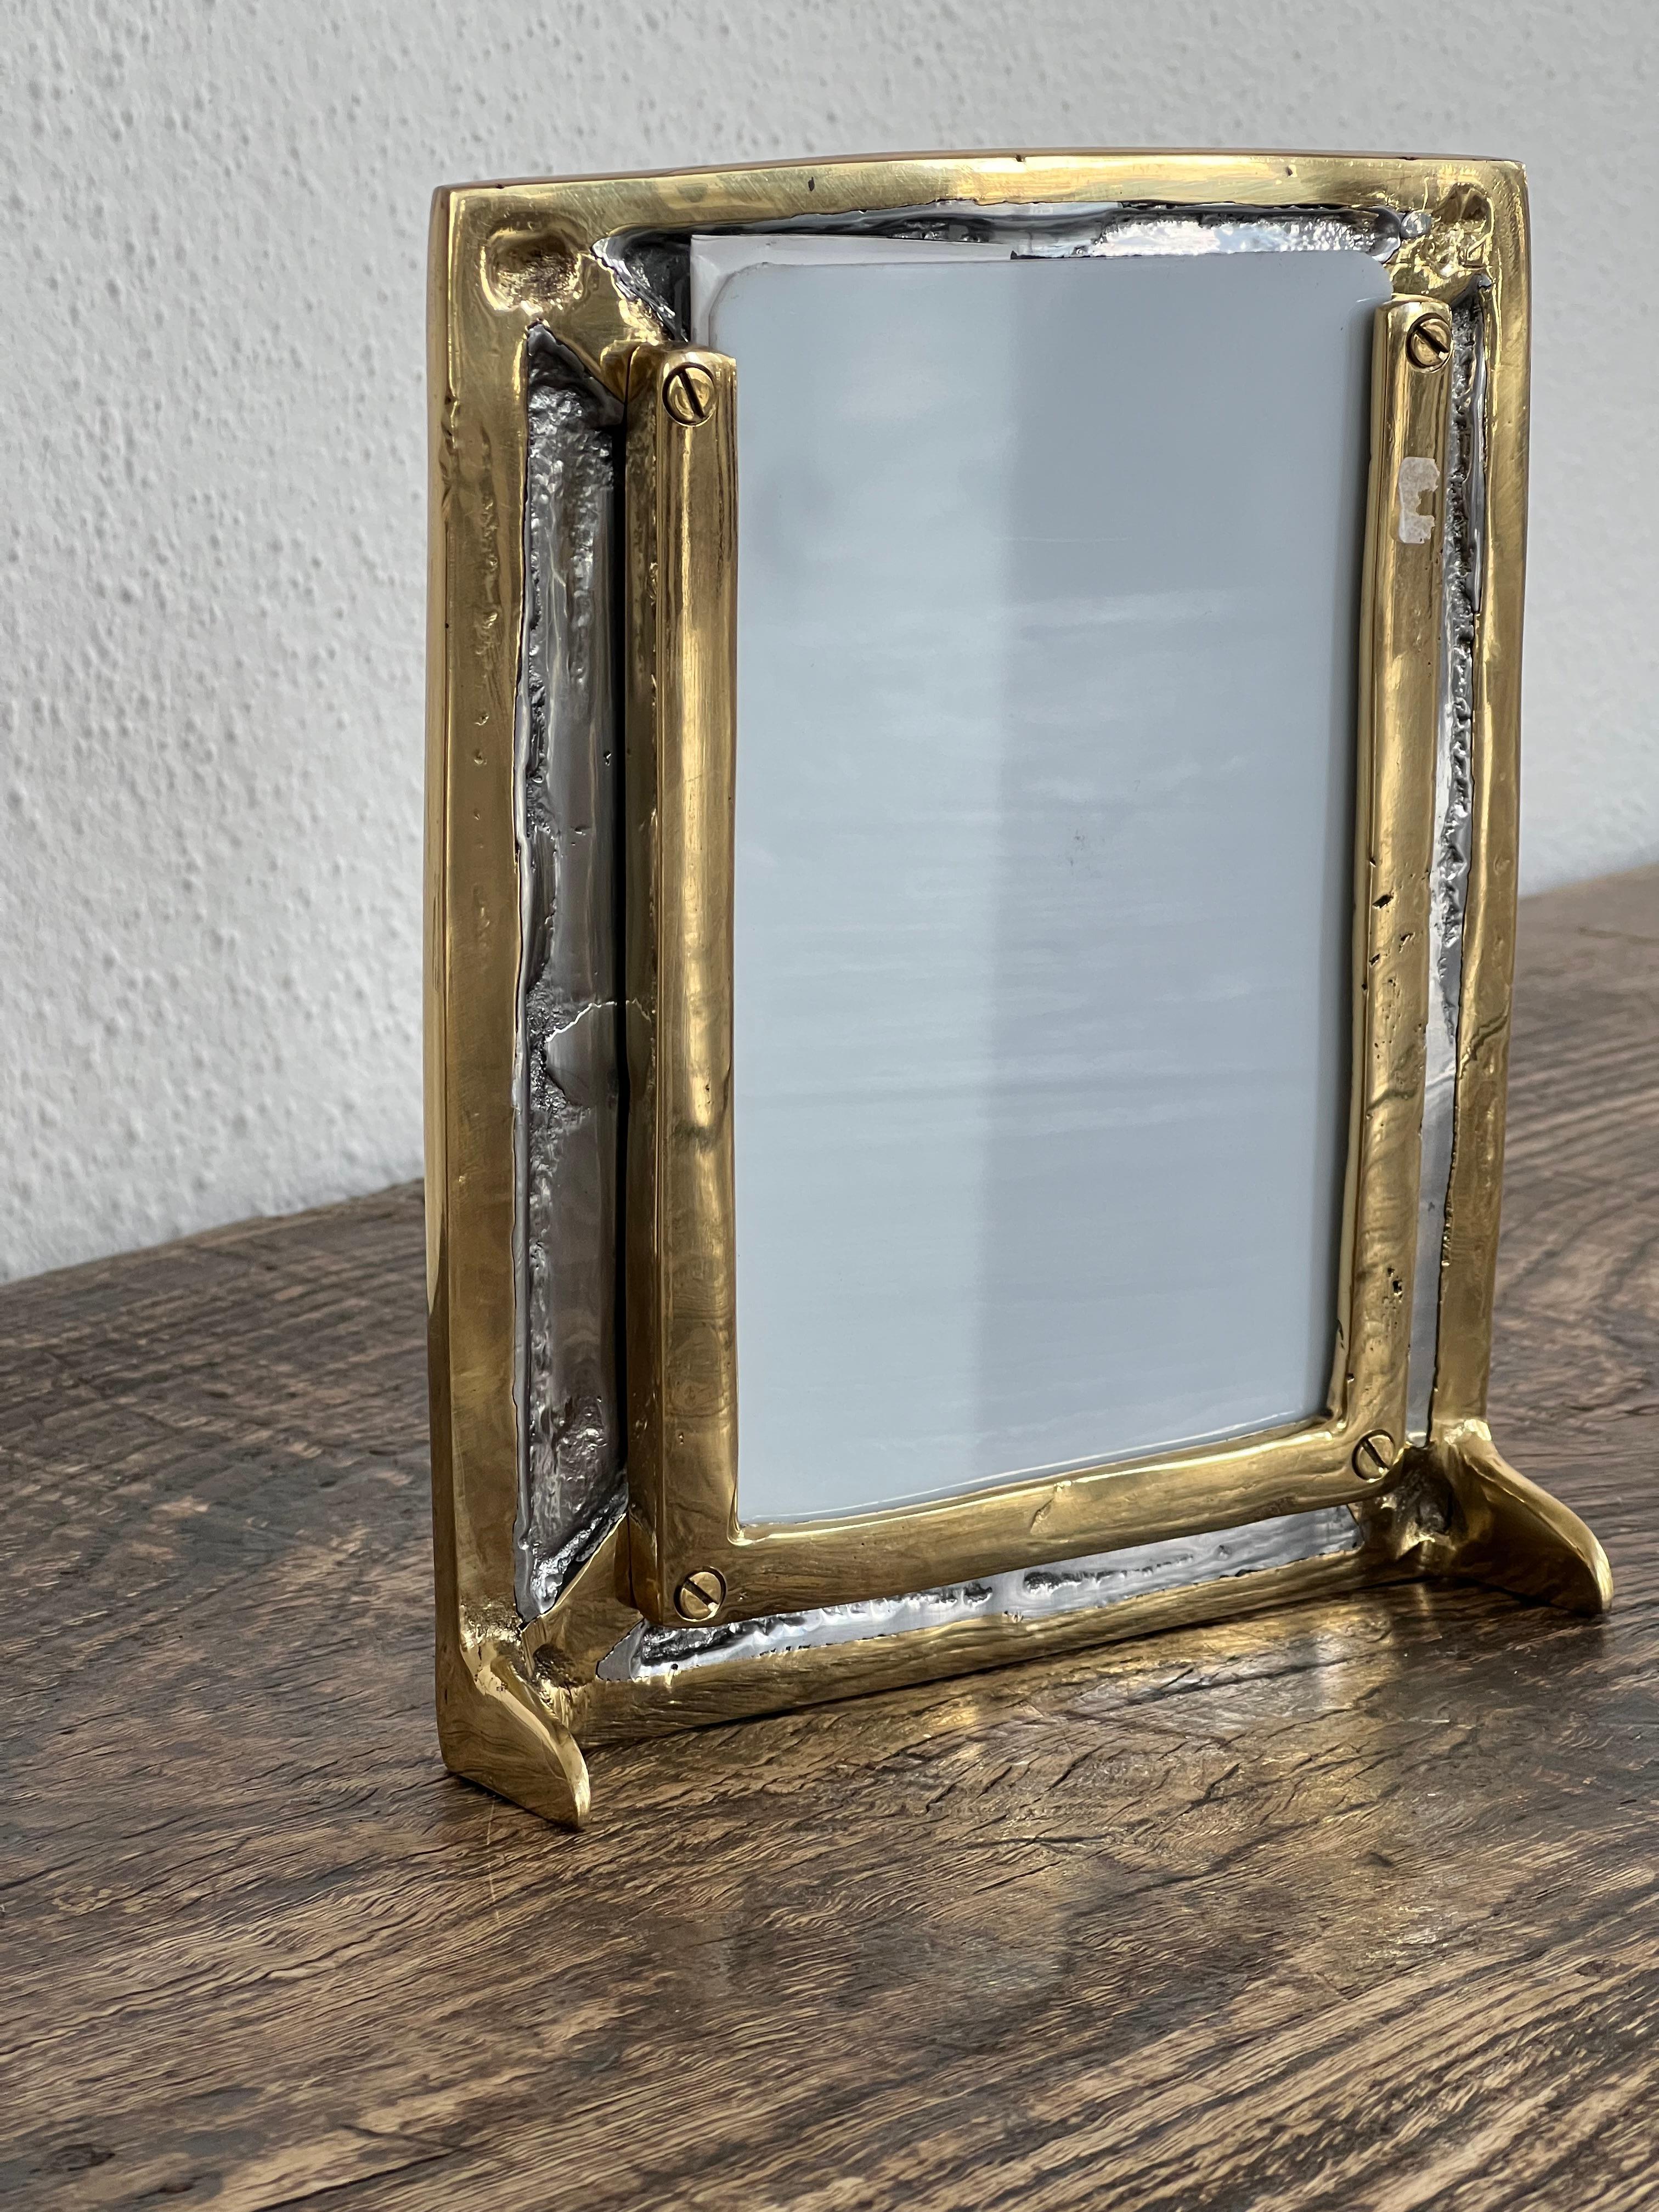 Contemporary Decorative Diagonal Picture Frame N019 Solid Cast Brass Aluminum Handmade Spain  For Sale